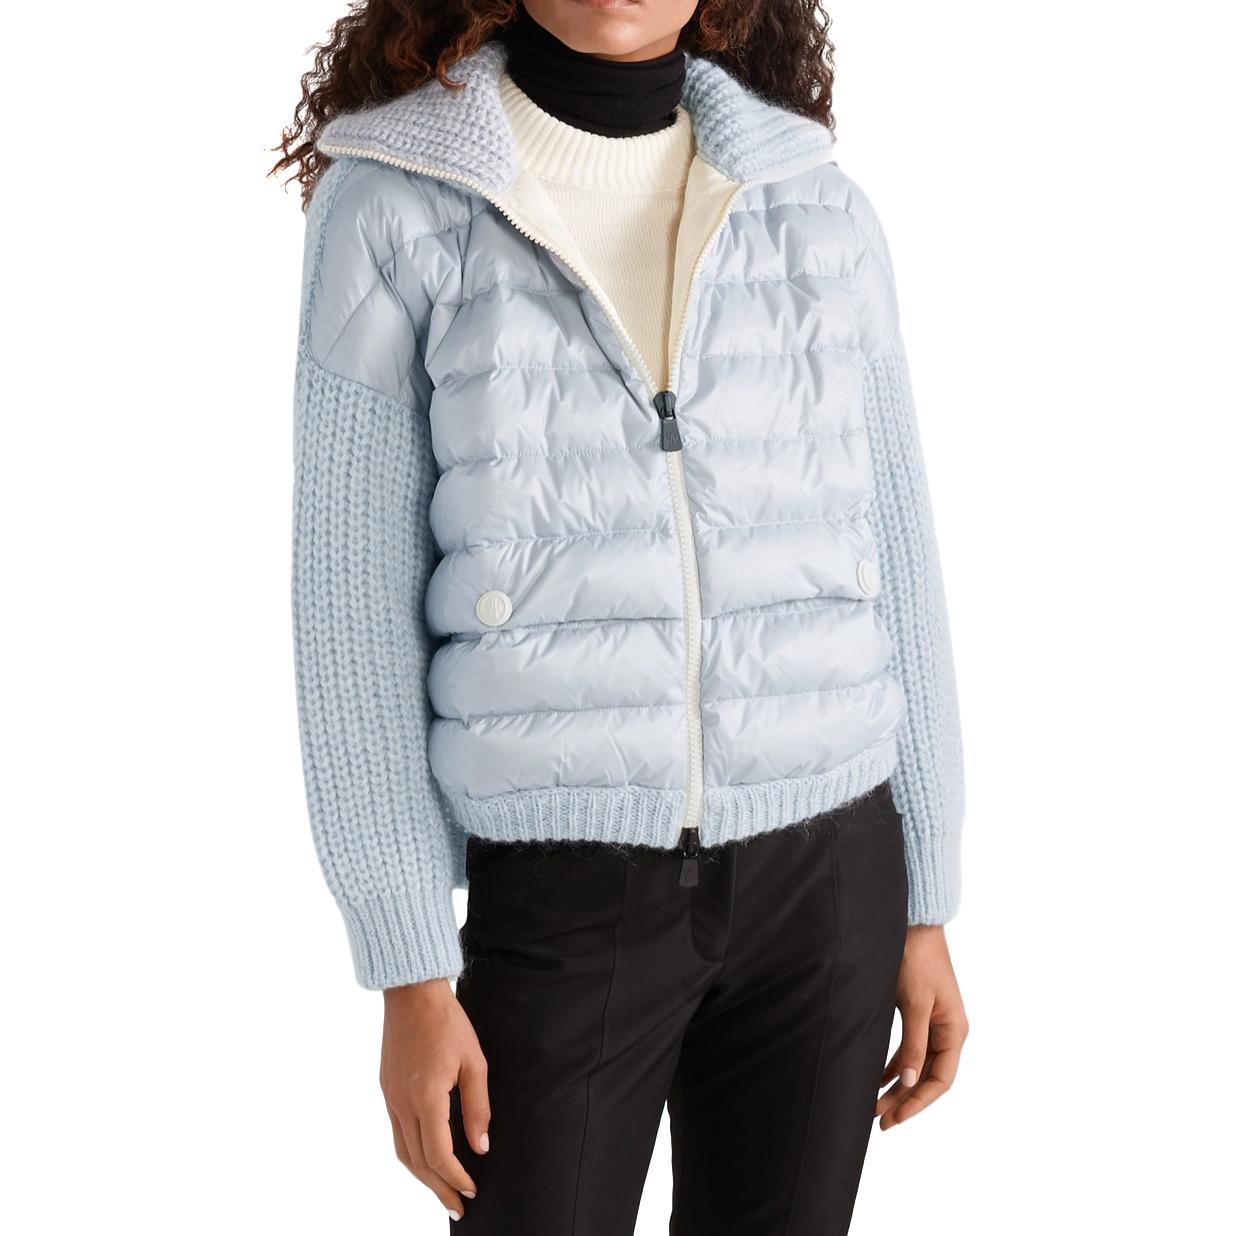 Moncler Grenoble Blue Oversized Quilted and Knit Cardigan

-Versatile piece that combines the warmth of a winter jacket with the soft feel of your favorite sweater
-Gorgeous sky blue hue 
-Oversized fit
-Quilted shell
-knitted back panel and